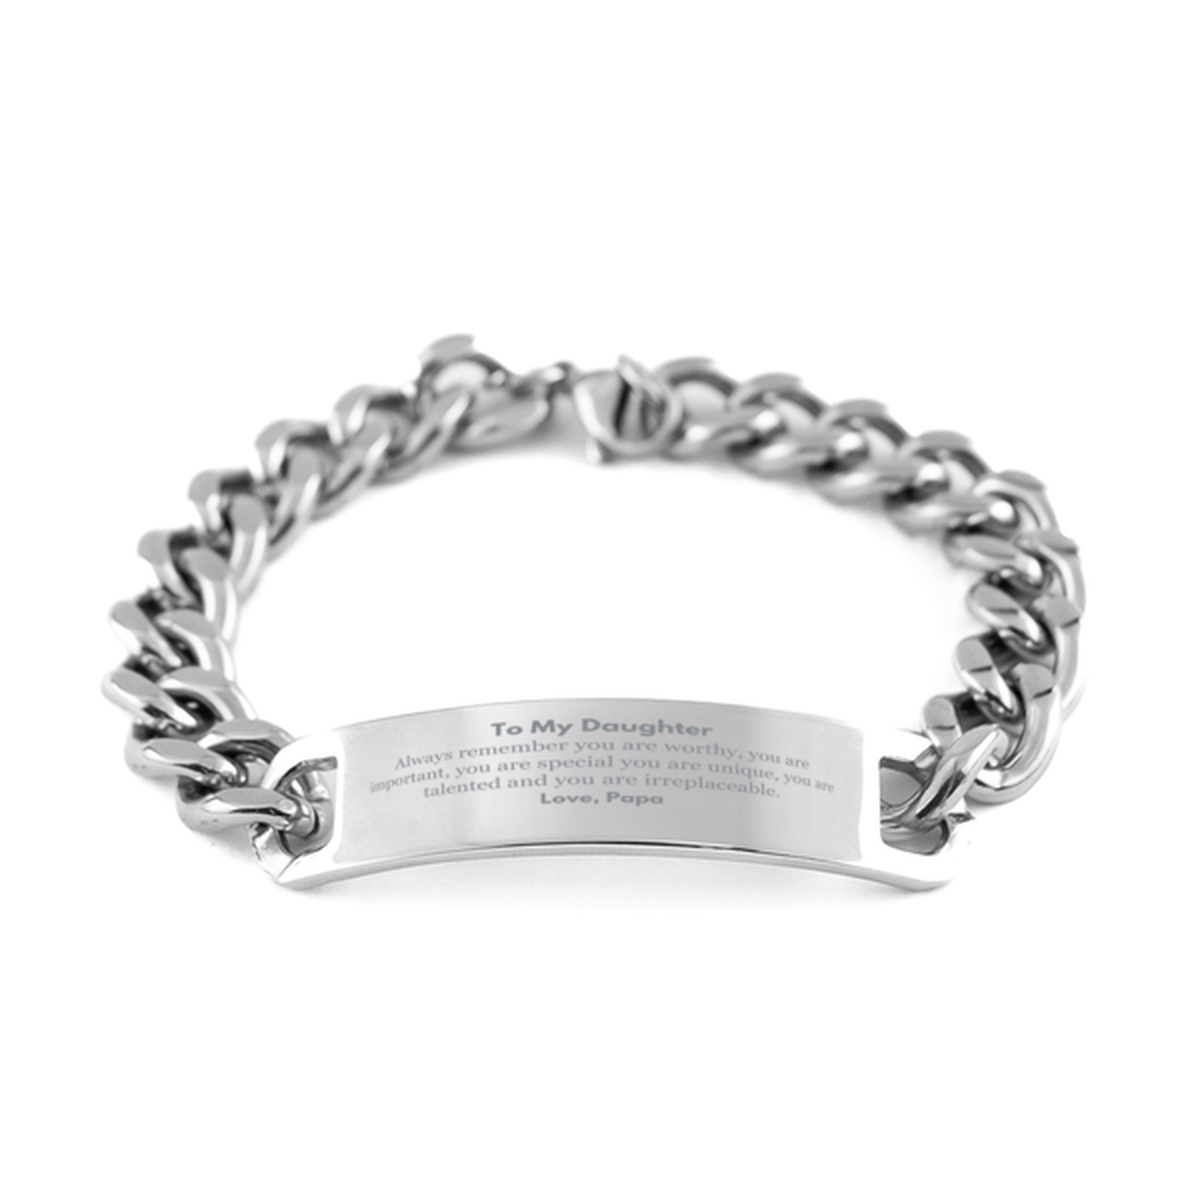 Daughter Birthday Gifts from Papa, Inspirational Cuban Chain Stainless Steel Bracelet for Daughter Christmas Graduation Gifts for Daughter Always remember you are worthy, you are important. Love, Papa